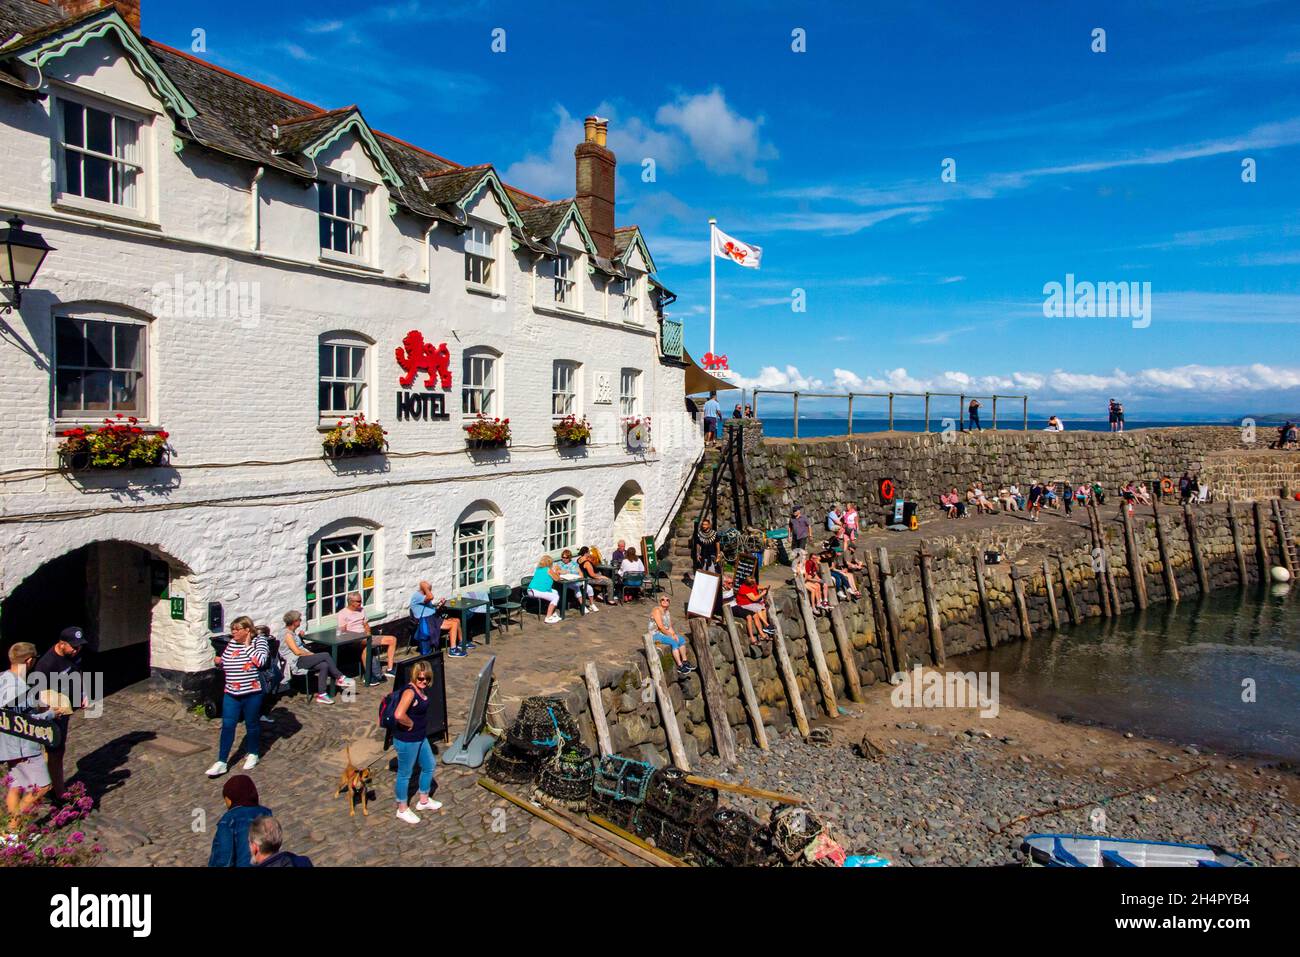 Red Lion Hotel in Clovelly a harbour village overlooking Bideford Bay and the Bristol Channel in North Devon England UK Stock Photo